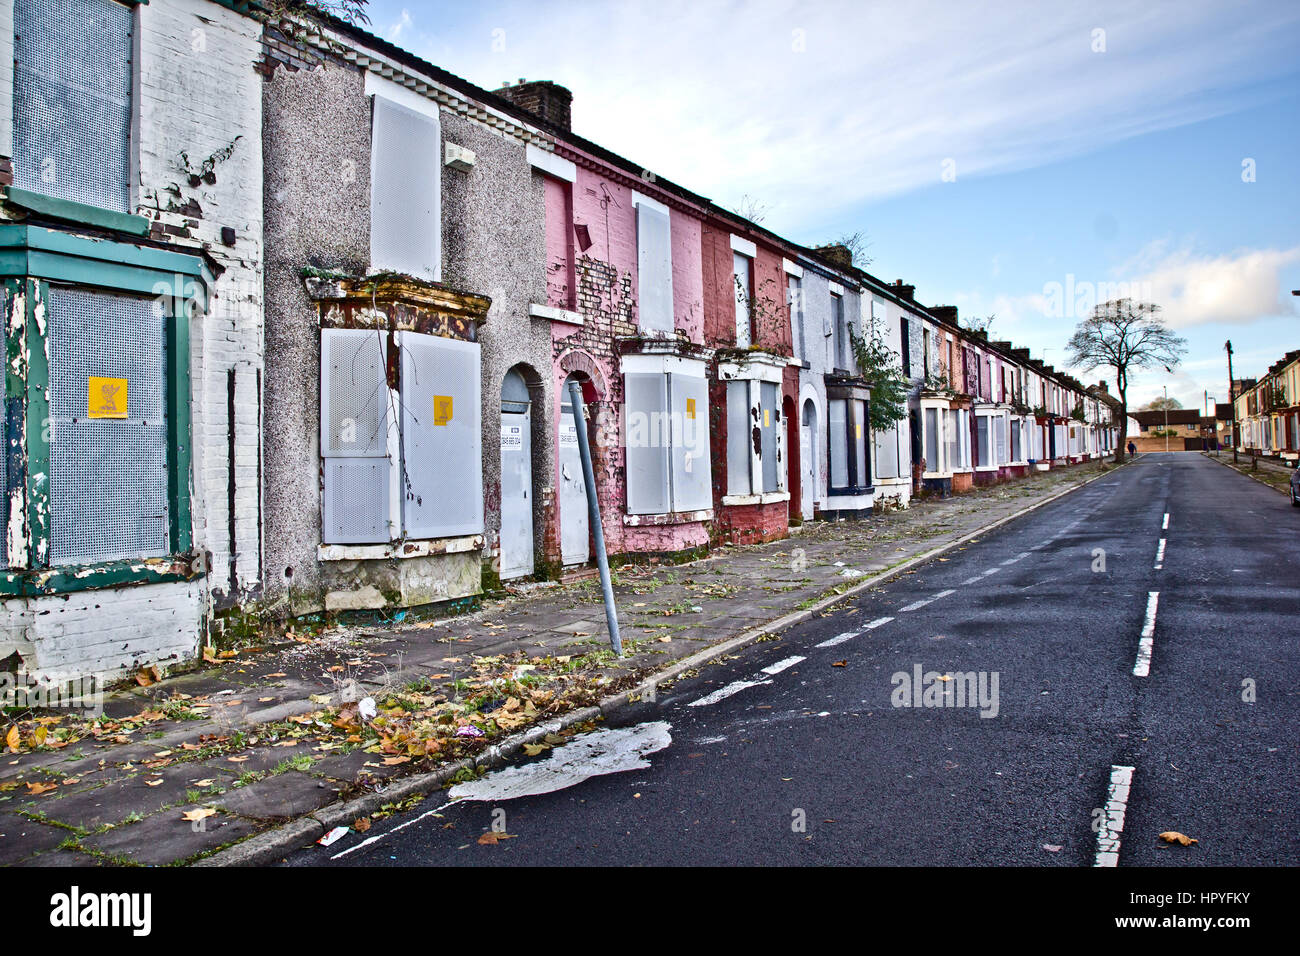 Abandoned Houses In The Welsh Streets, Toxteth, Liverpool, England Waiting to Be Demolished Stock Photo